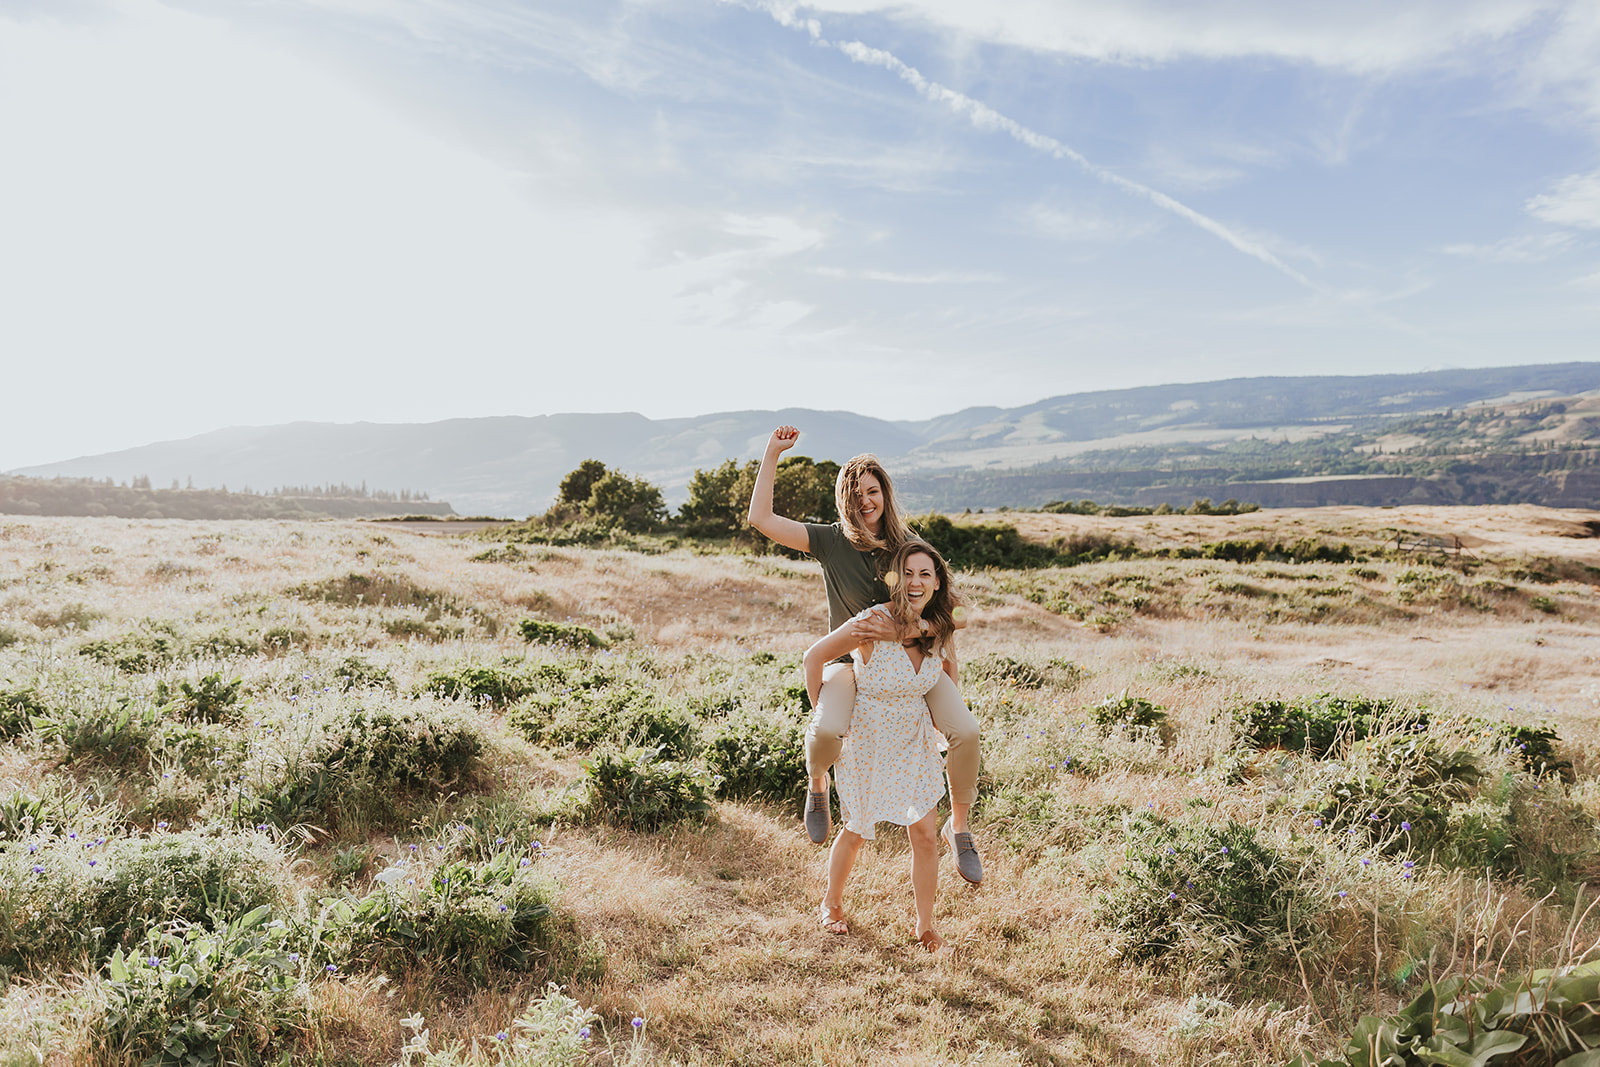 A couple dances in the fields of the Rowena Crest in the Columbia River Gorge.